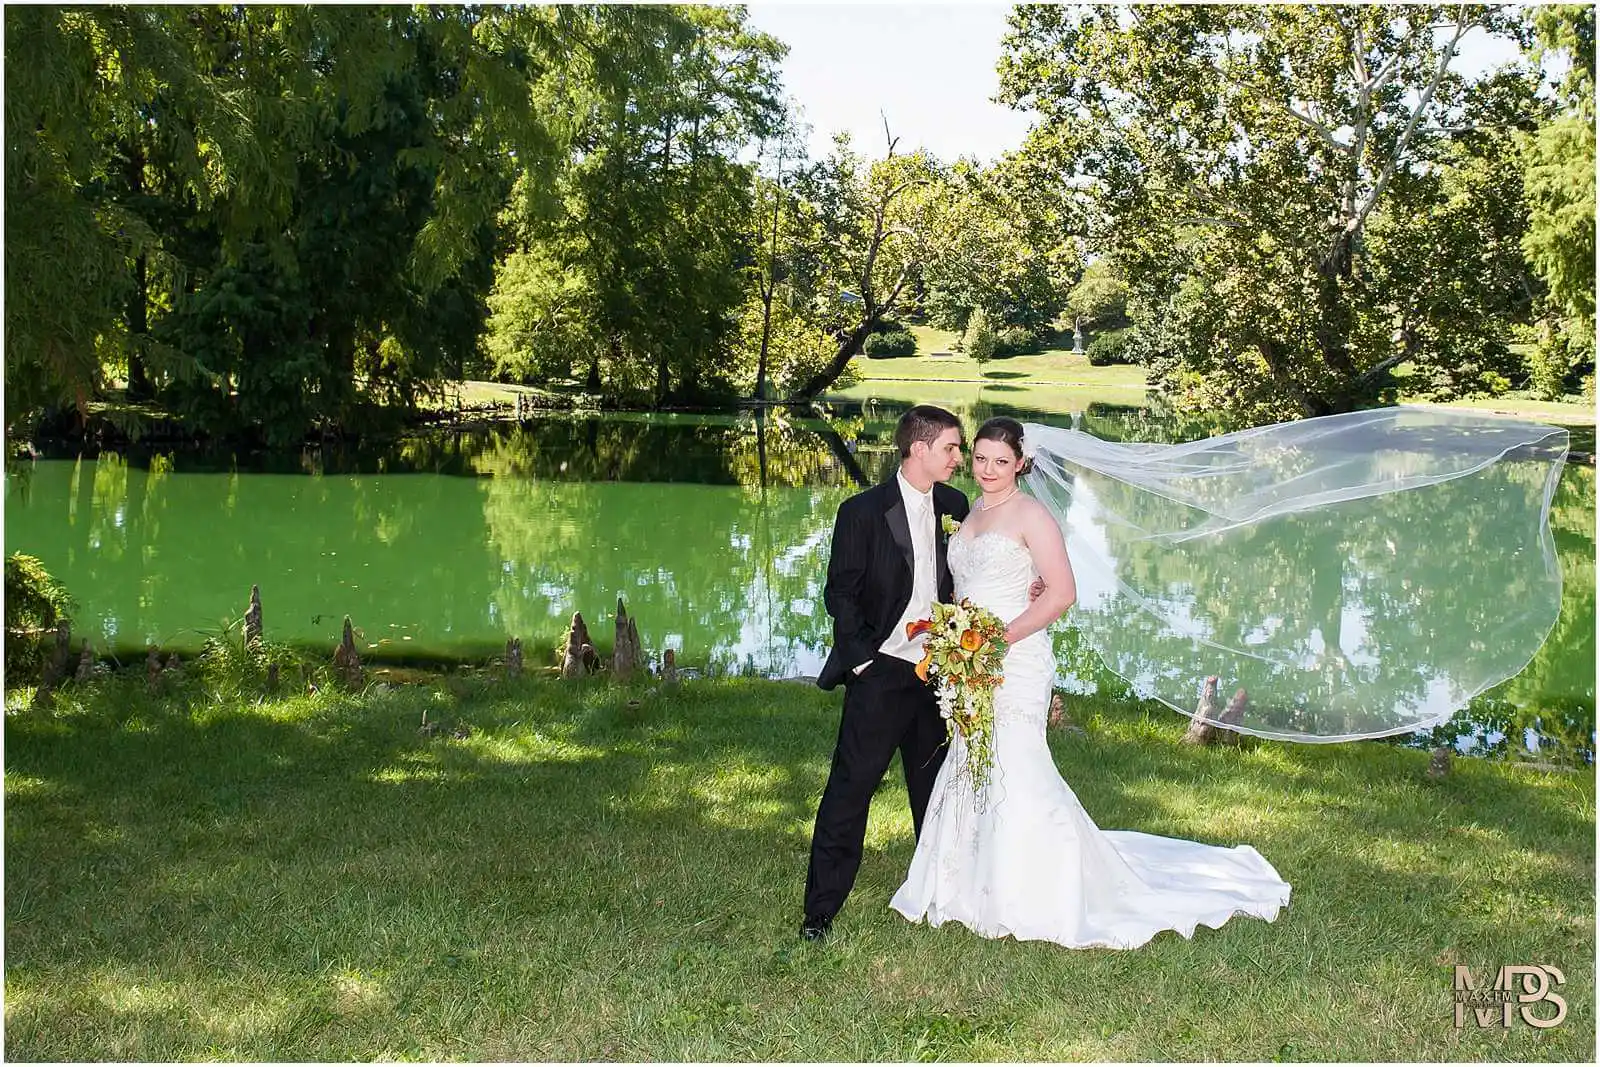 Bride and groom posing by a serene lakeside on wedding day.